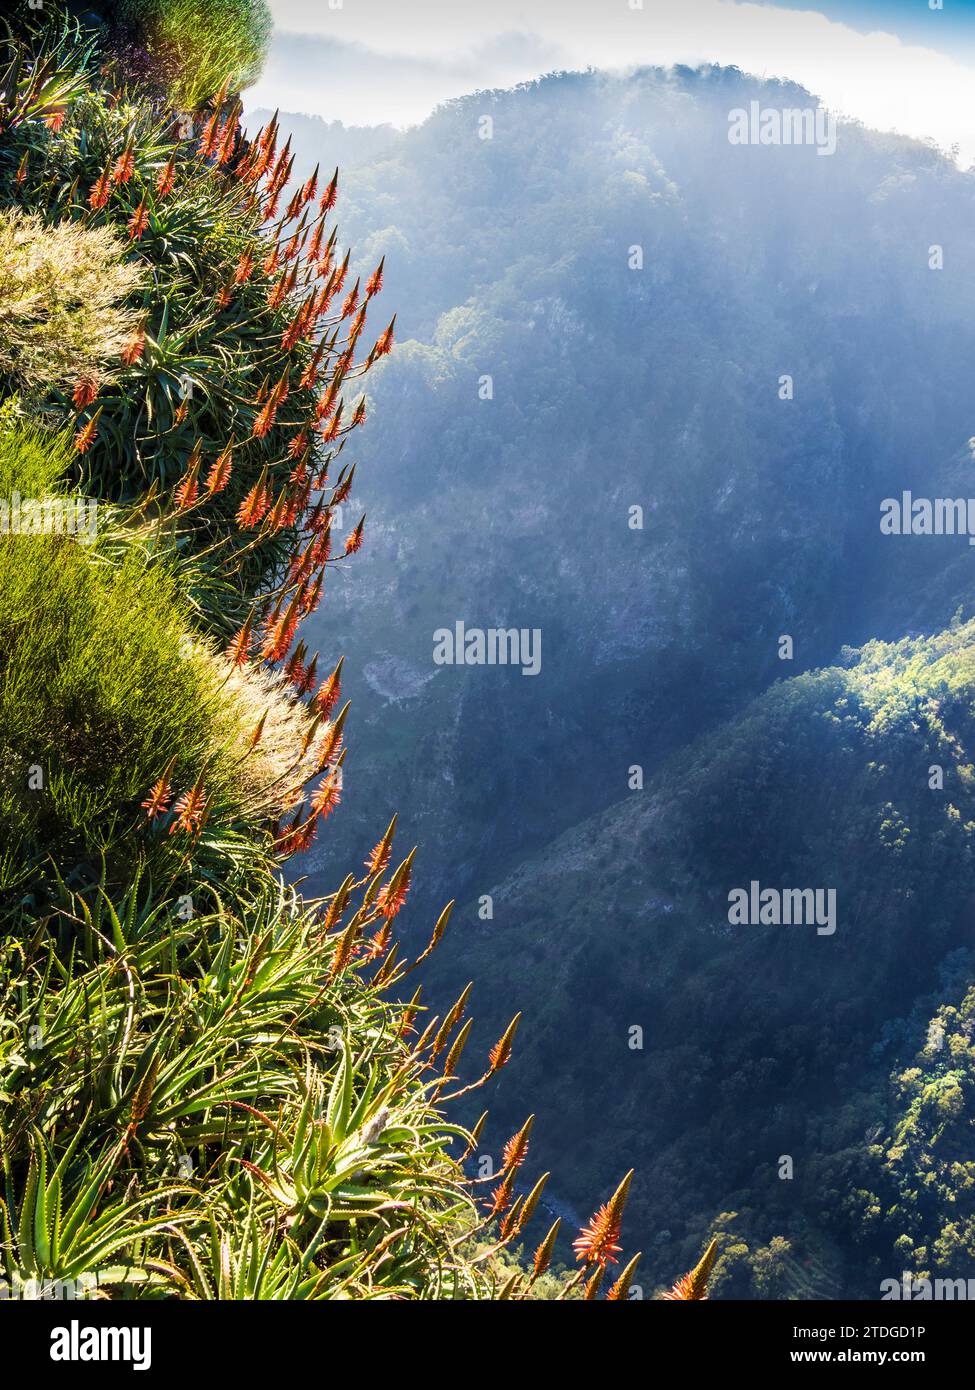 Red Hot Pokers growing wild up the mountainside at Eira do Serrado in Madeira. Stock Photo